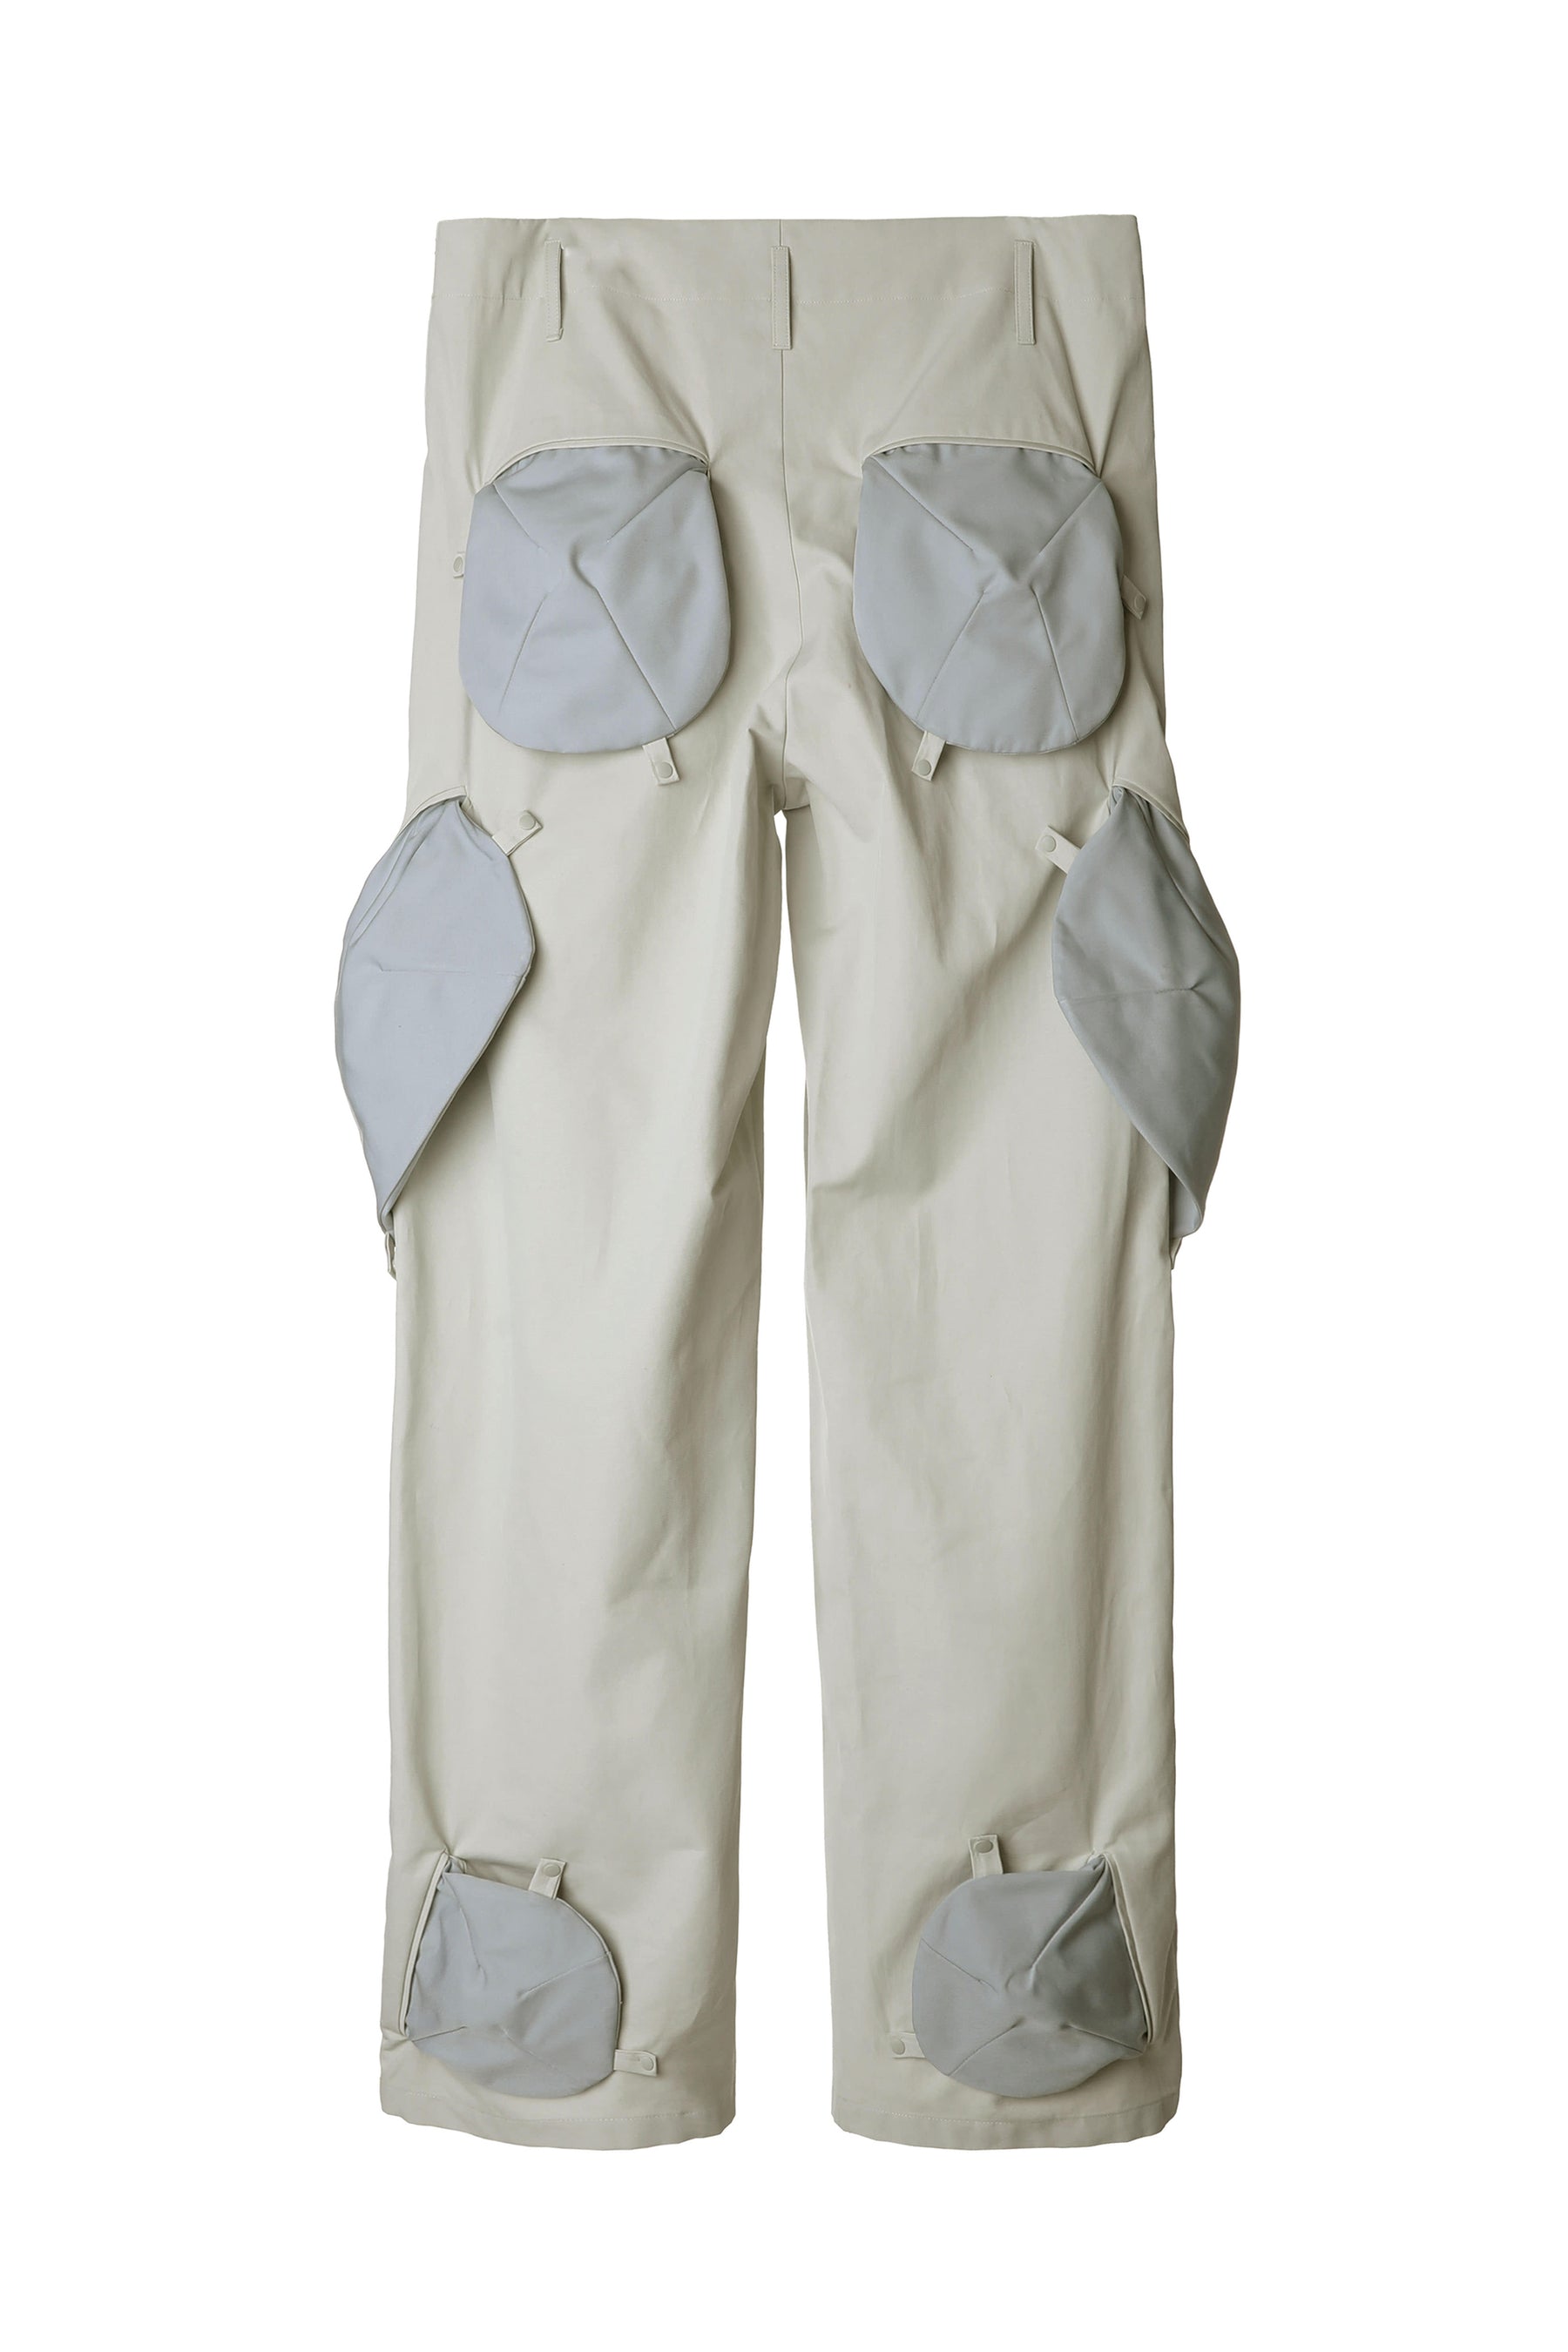 POST ARCHIVE FACTION FW22 5.0 TROUSERS CENTER / GRY - NUBIAN